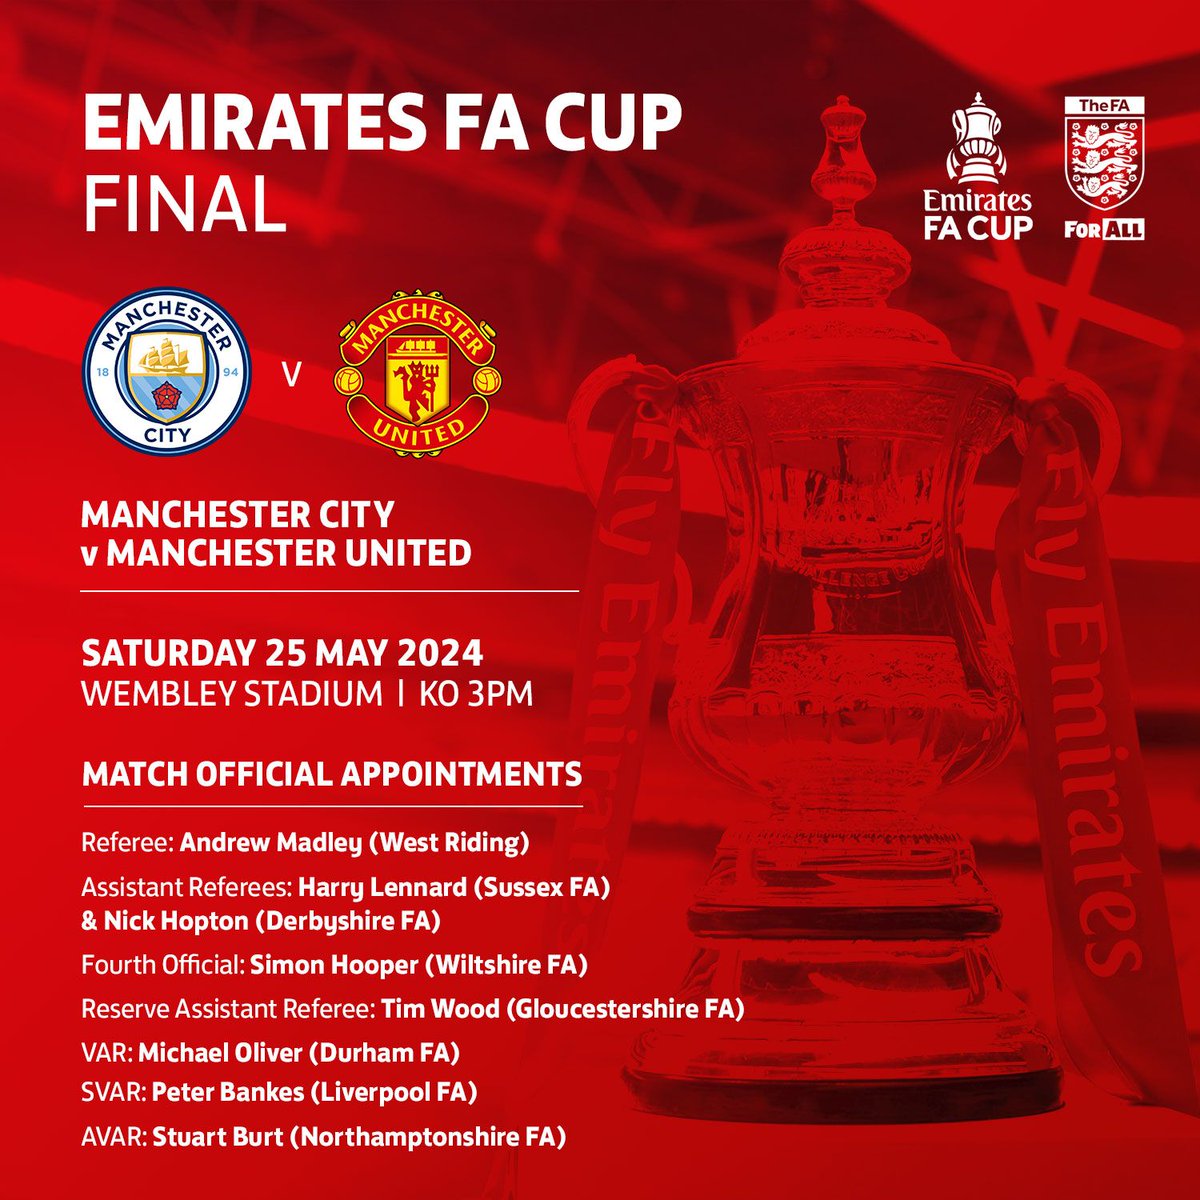 The match officials have been confirmed for this season's @EmiratesFACup Final. 🏆 Huge congratulations to everyone on their prestigious appointments. 👏 More ➡️ the-fa.com/3bg44w #EmiratesFACup